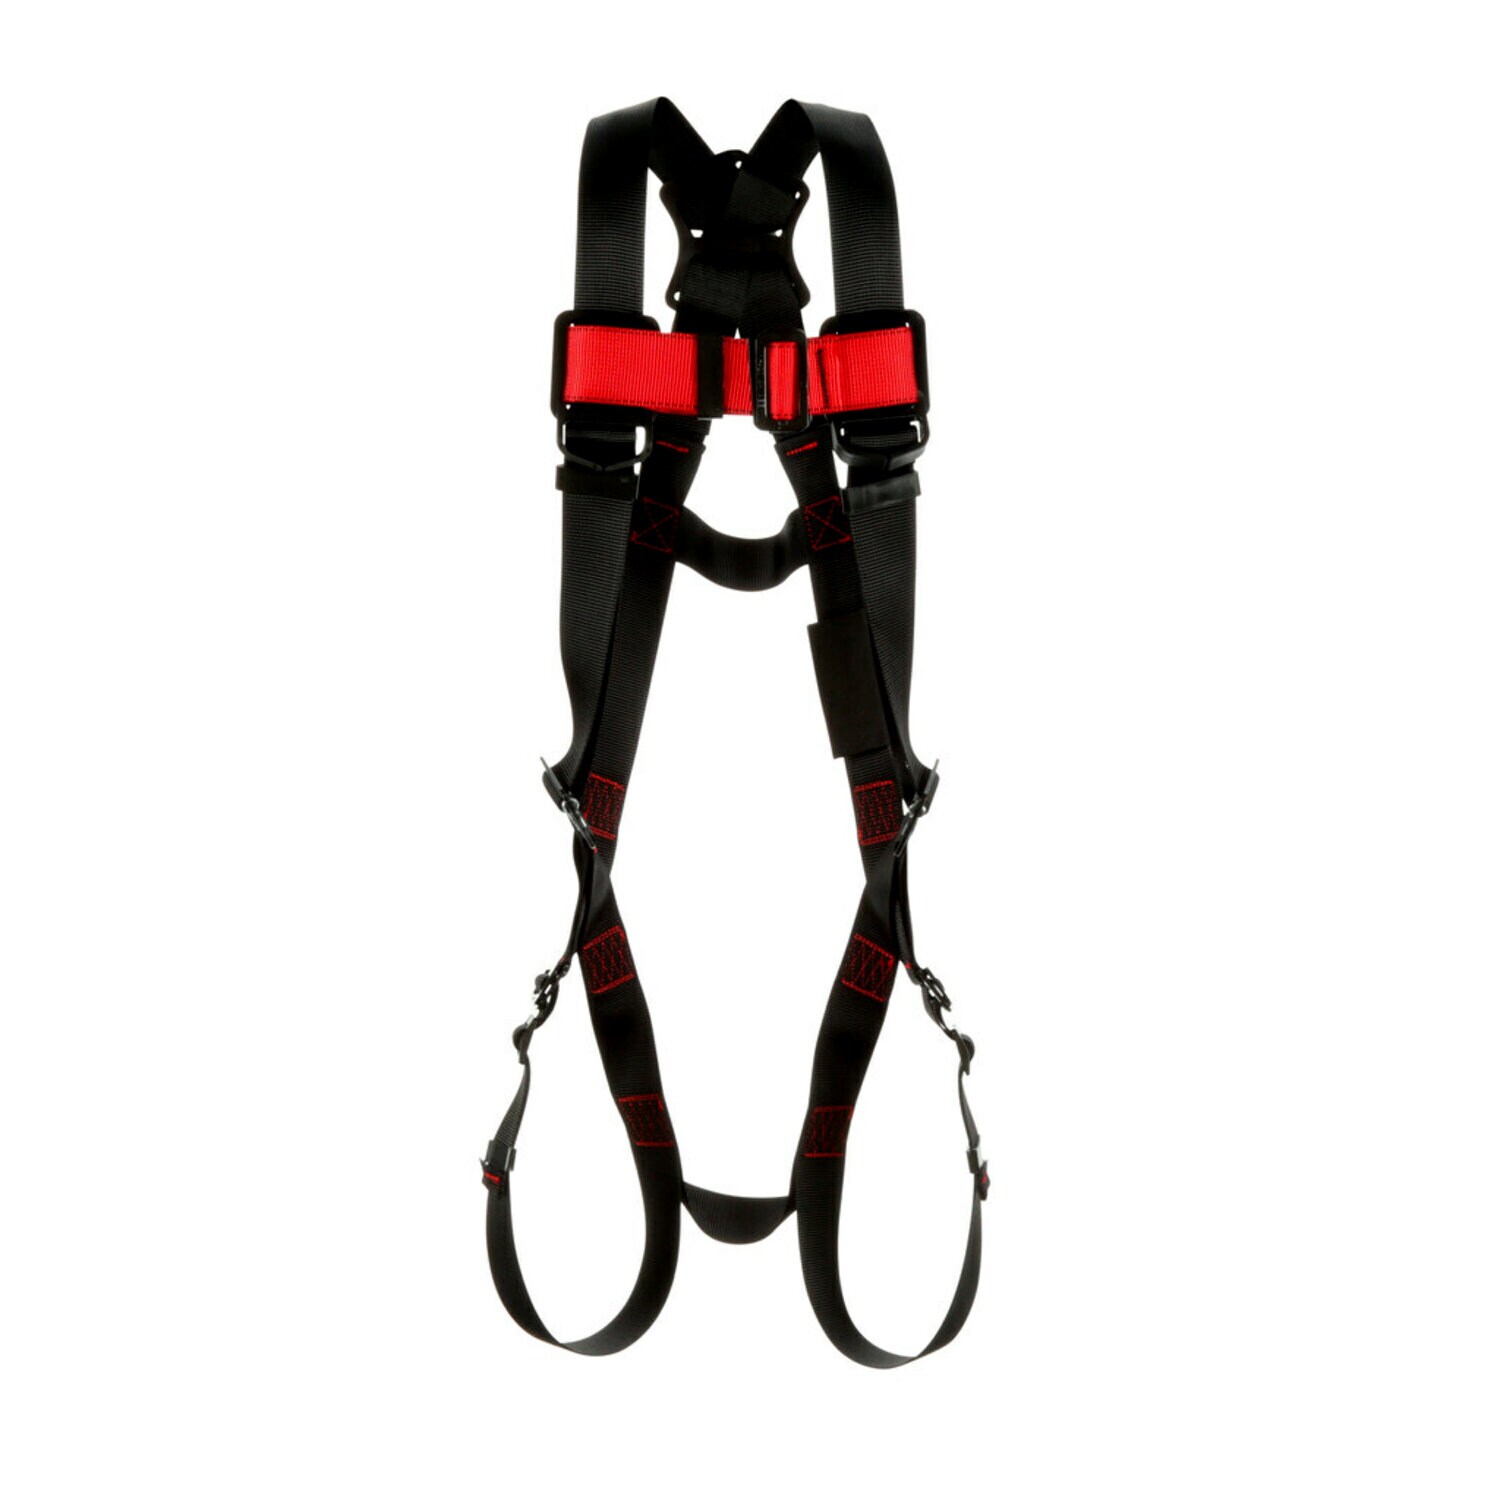 7012816859 - 3M Protecta P200 Vest Safety Harness 1161573, 2X